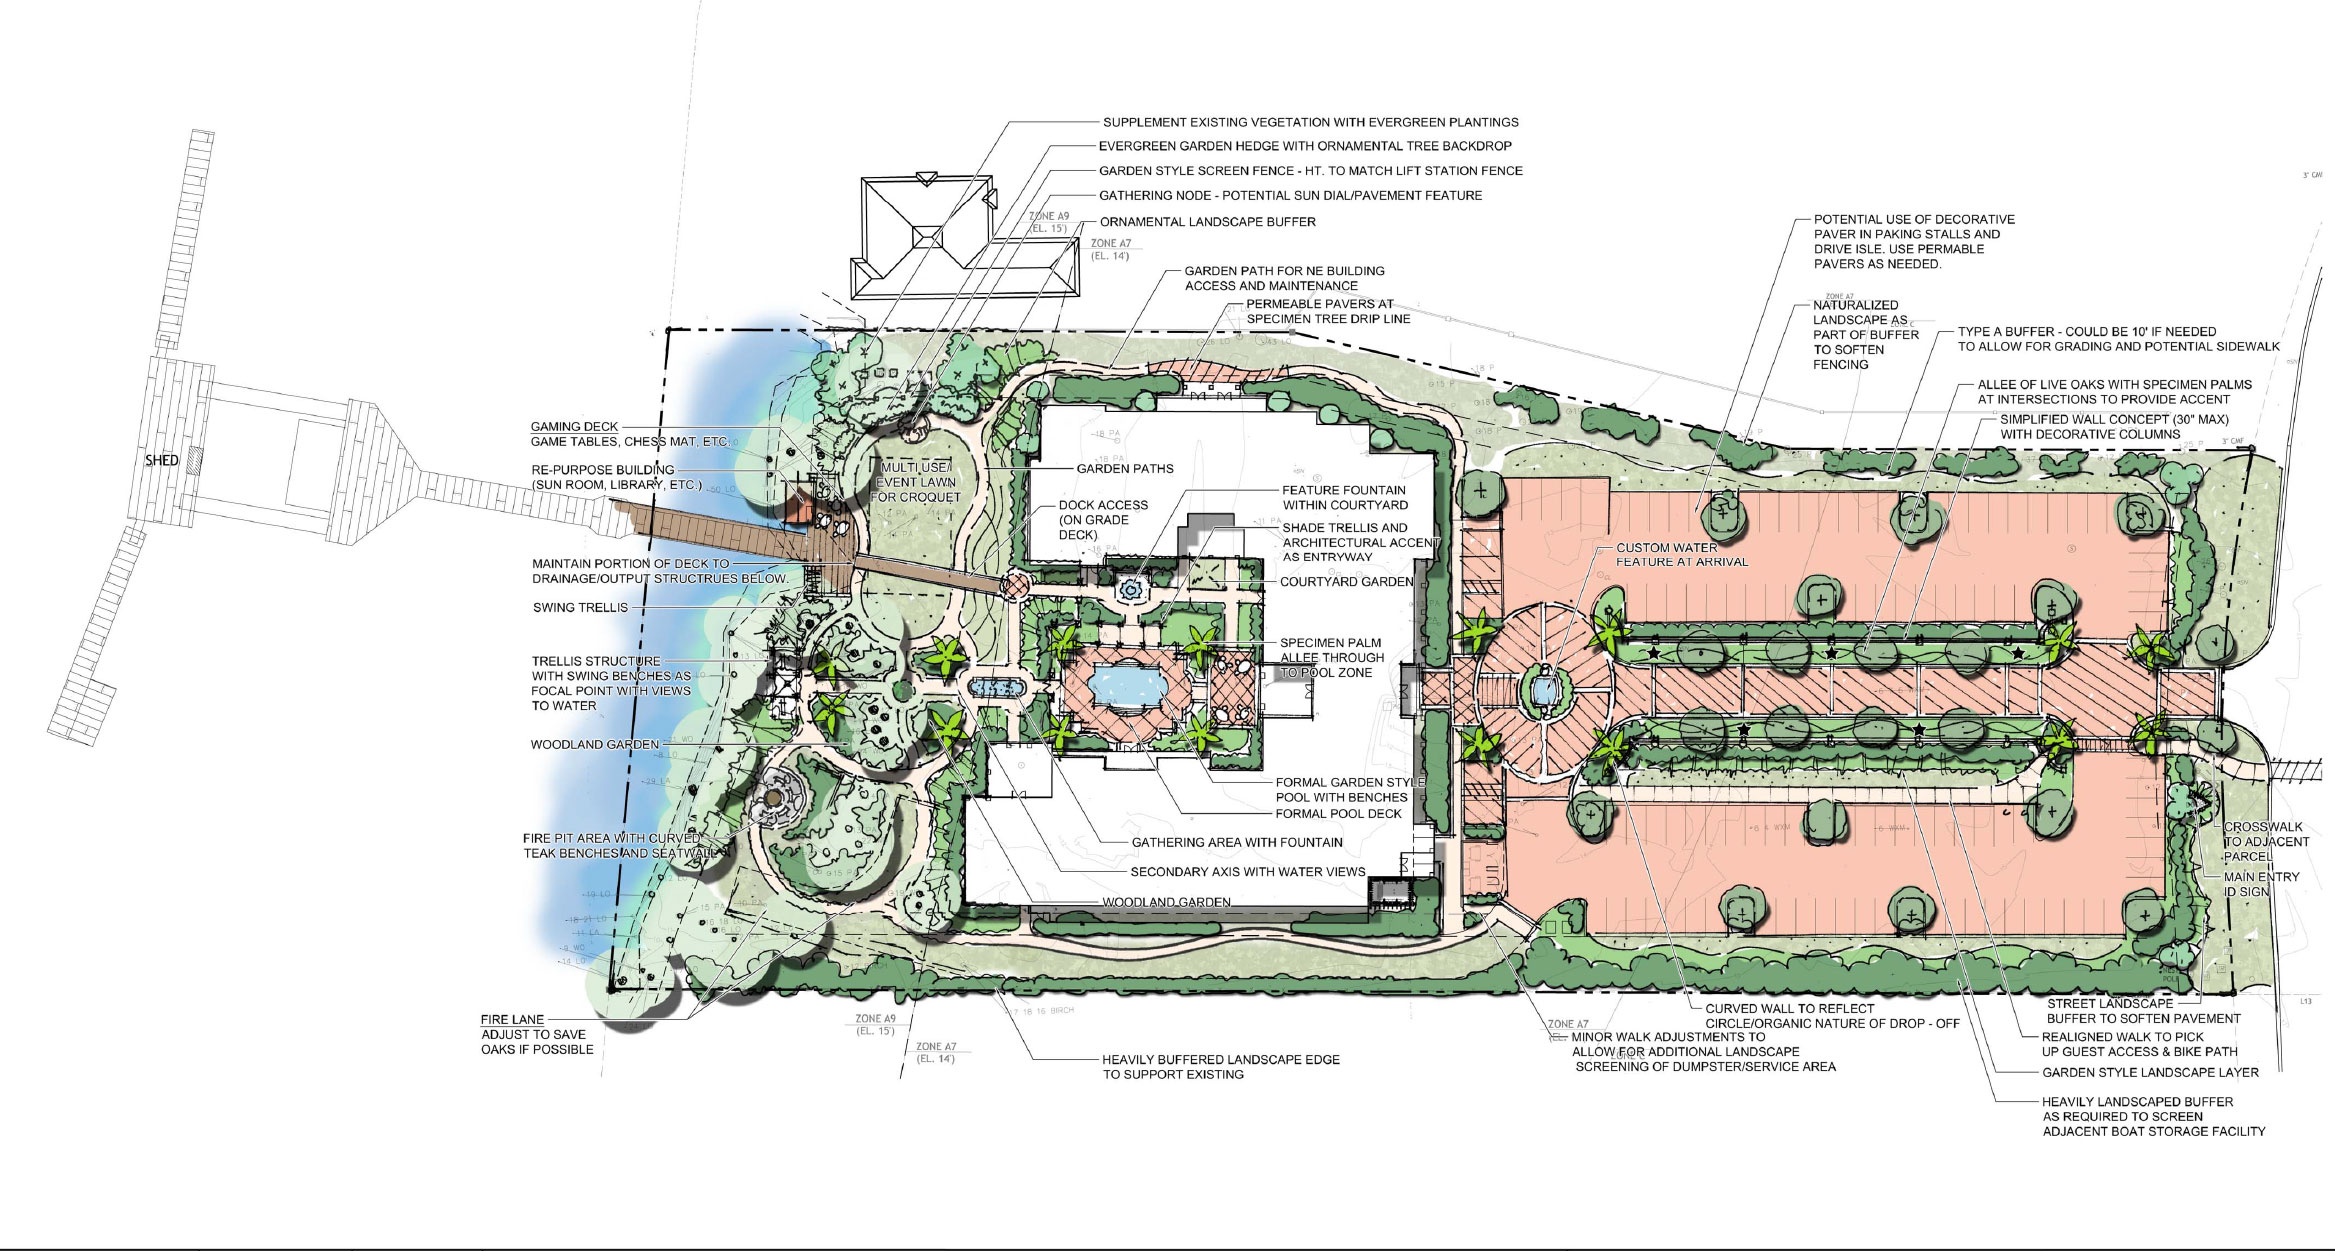 Bayshore Independent & Assisted Living Site Plan